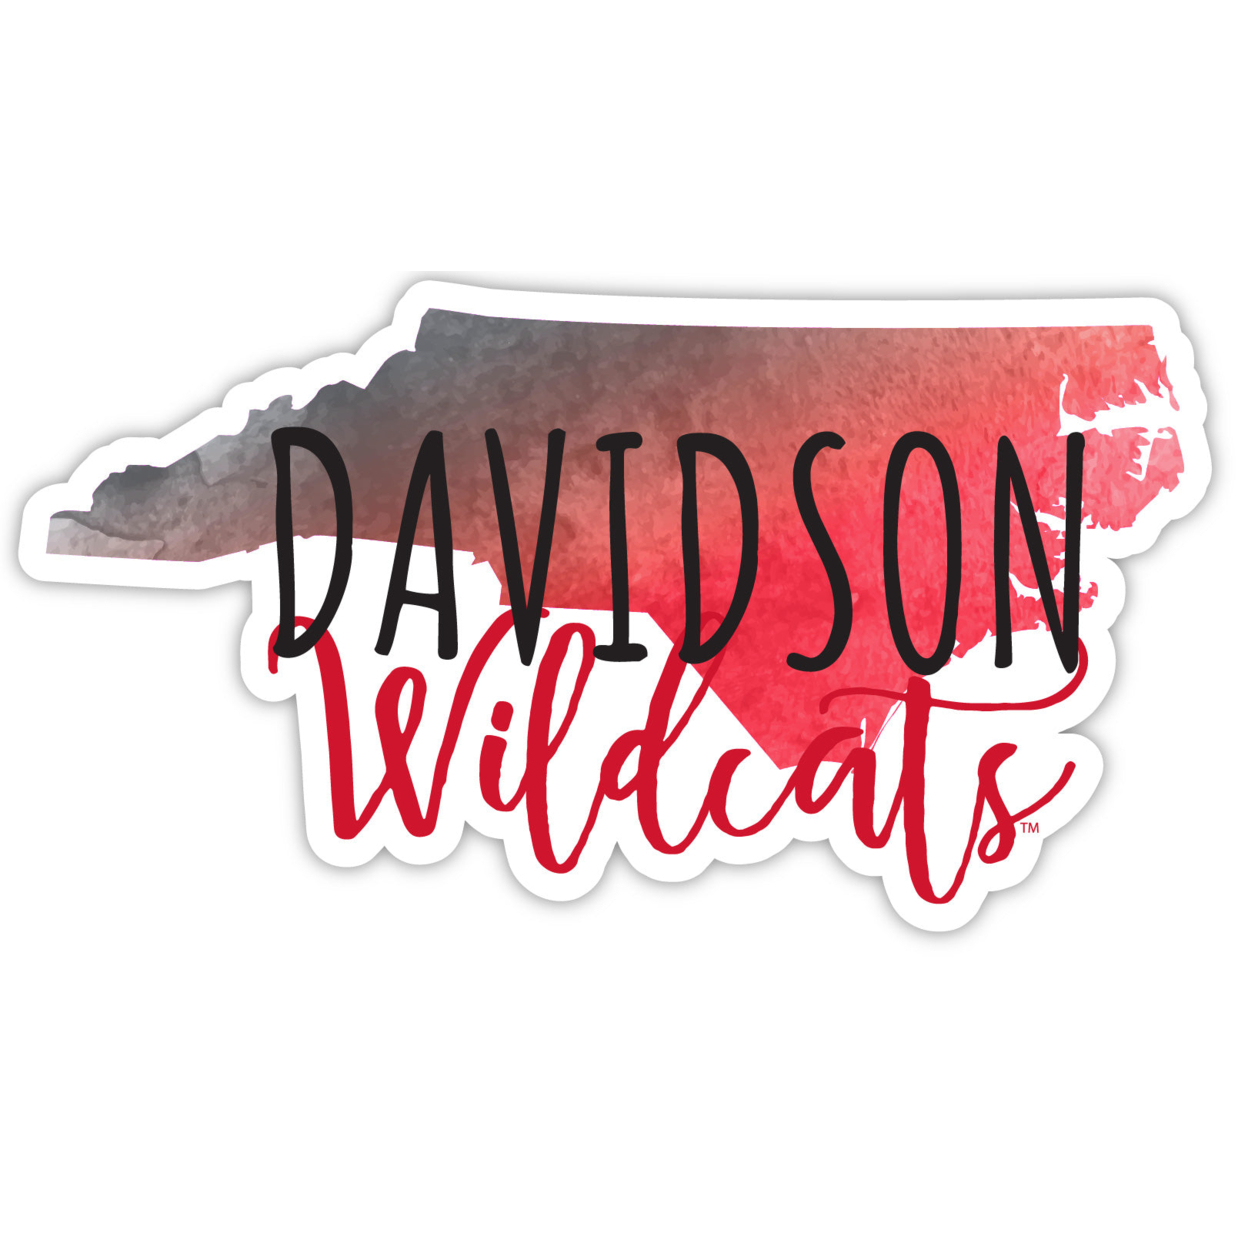 Davidson College Watercolor State Die Cut Decal 4-Inch